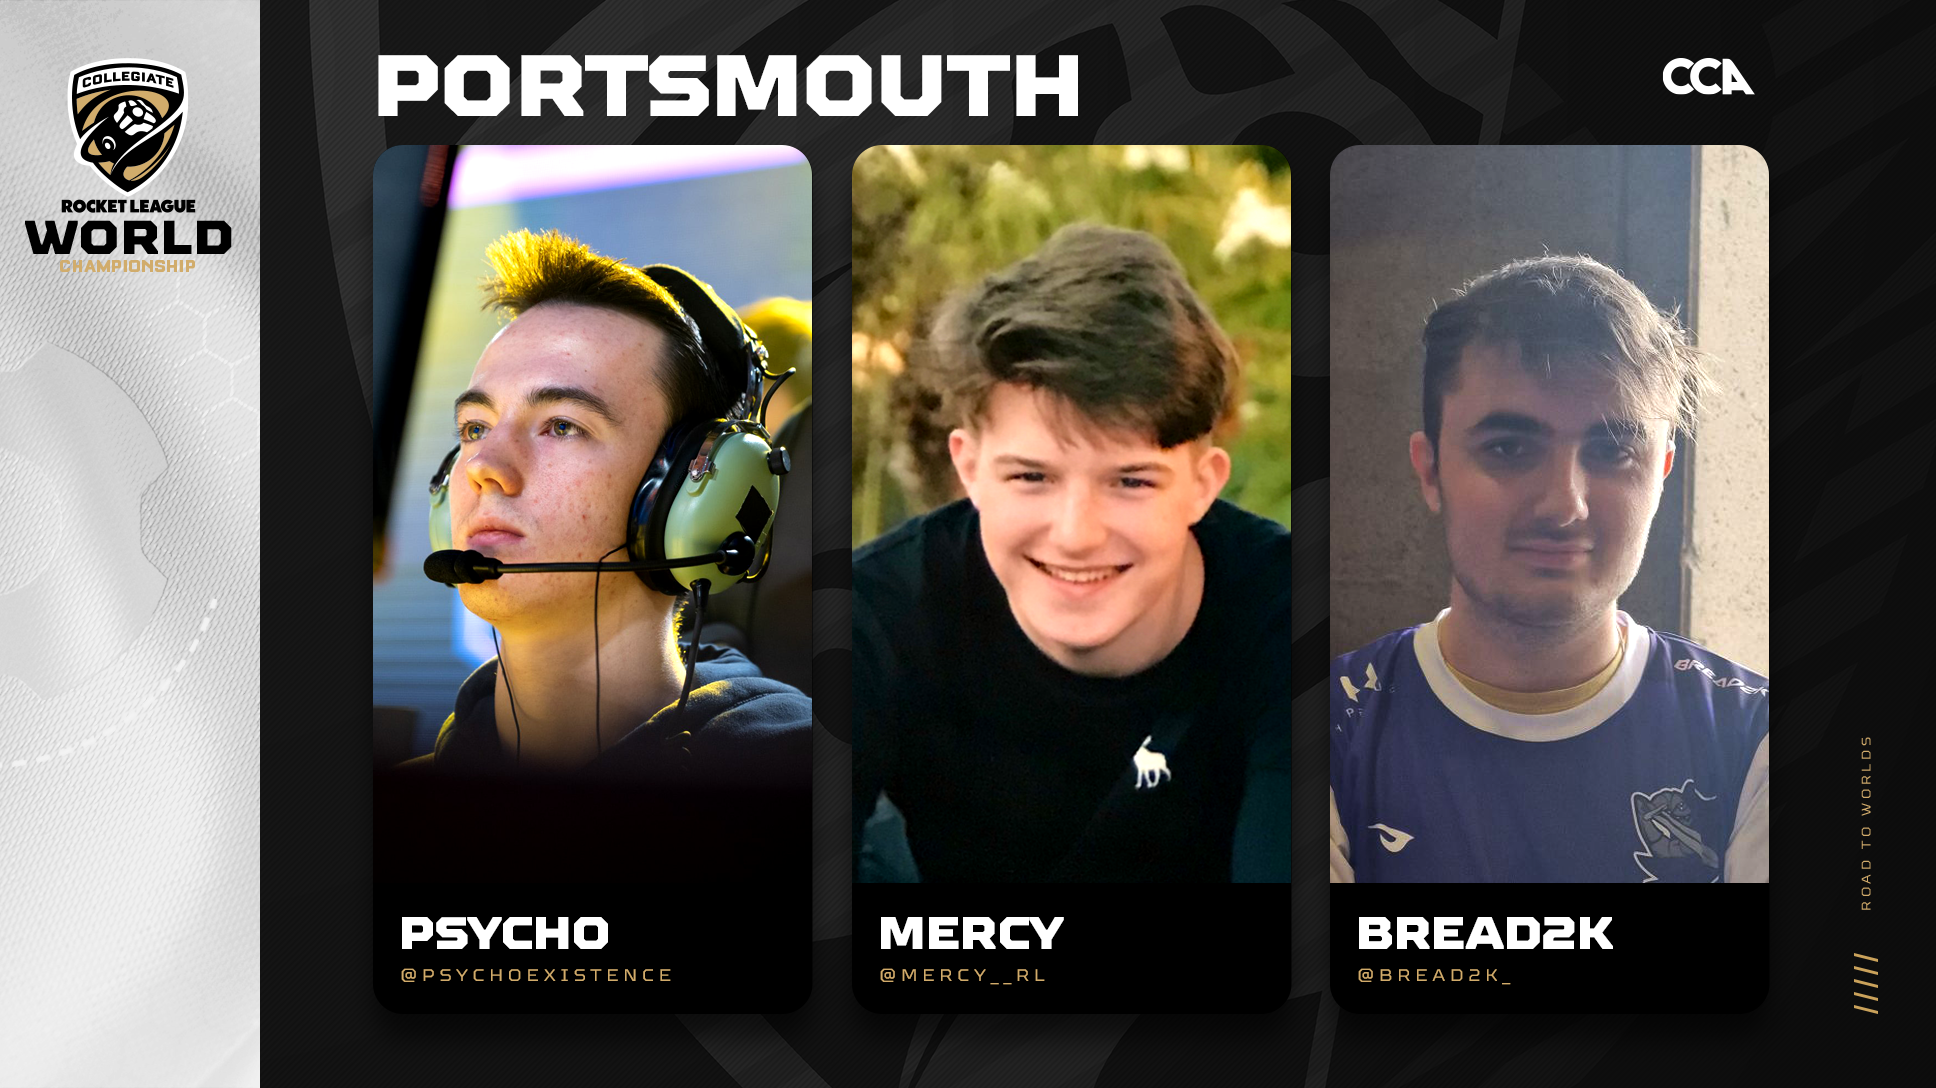 Portsmouth University Road to Worlds header with images of Psycho, Mercy, and Bread2k